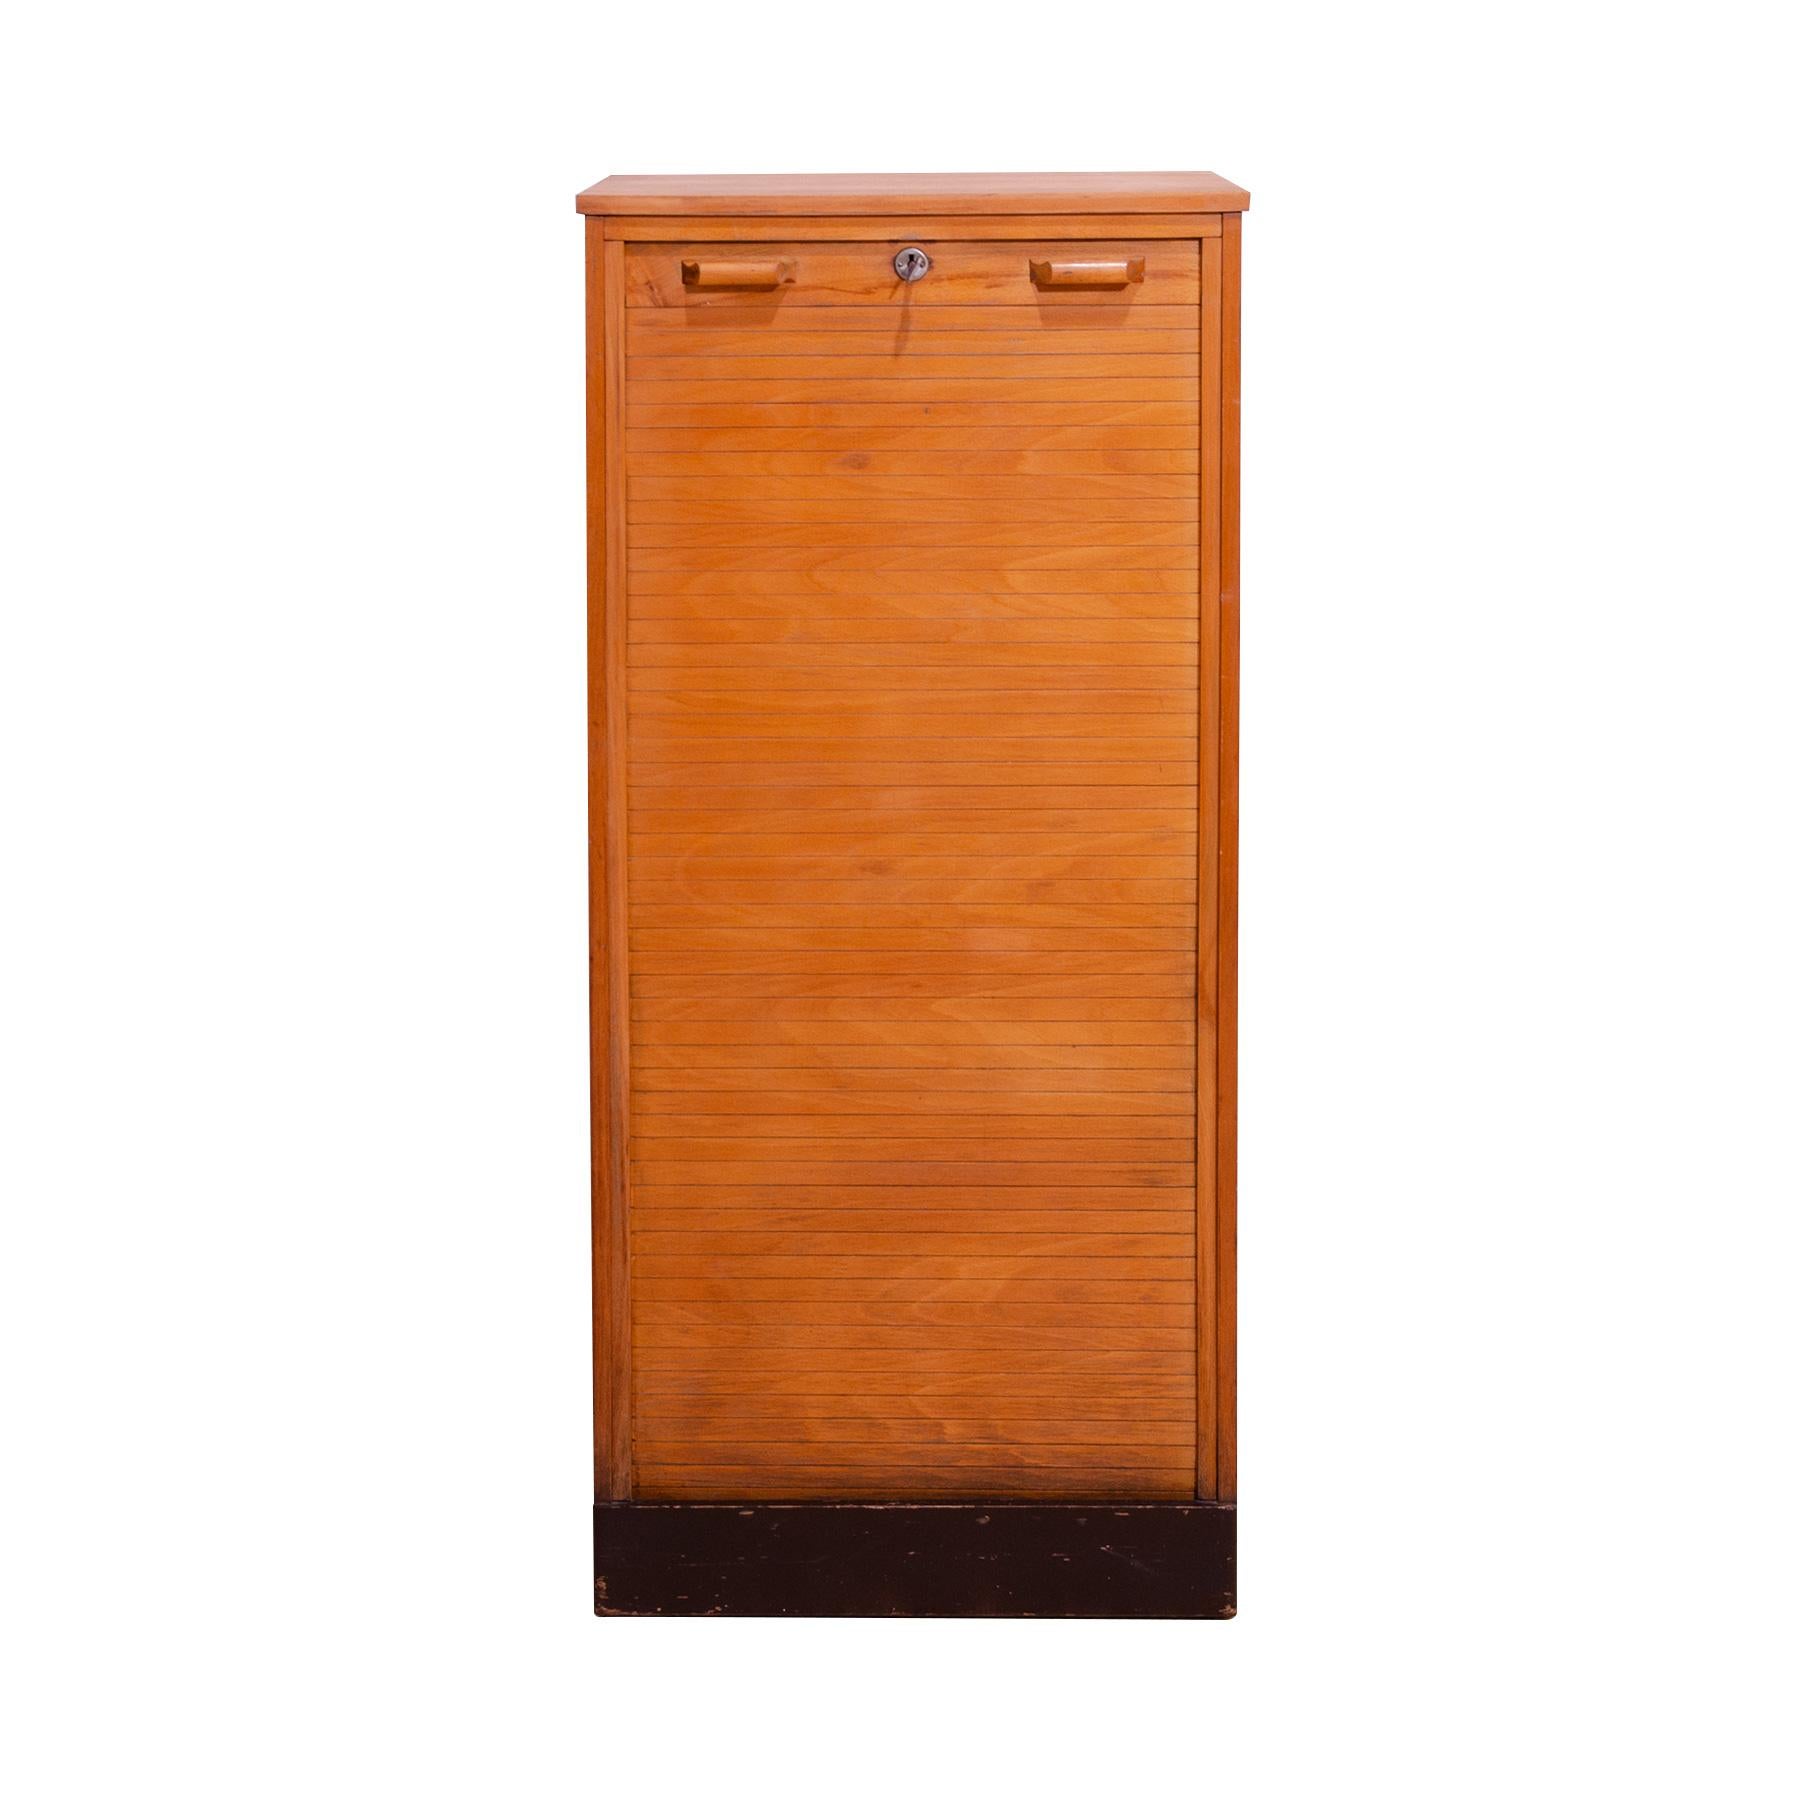 Roller blind cabinet made in the 1950s in the former Czechoslovakia. More precisely, in 1955 by the furniture company Interiér Praha. It is made of beech wood and plywood. The cabinet has a rolling opening mechanism. The outside has a total of 14